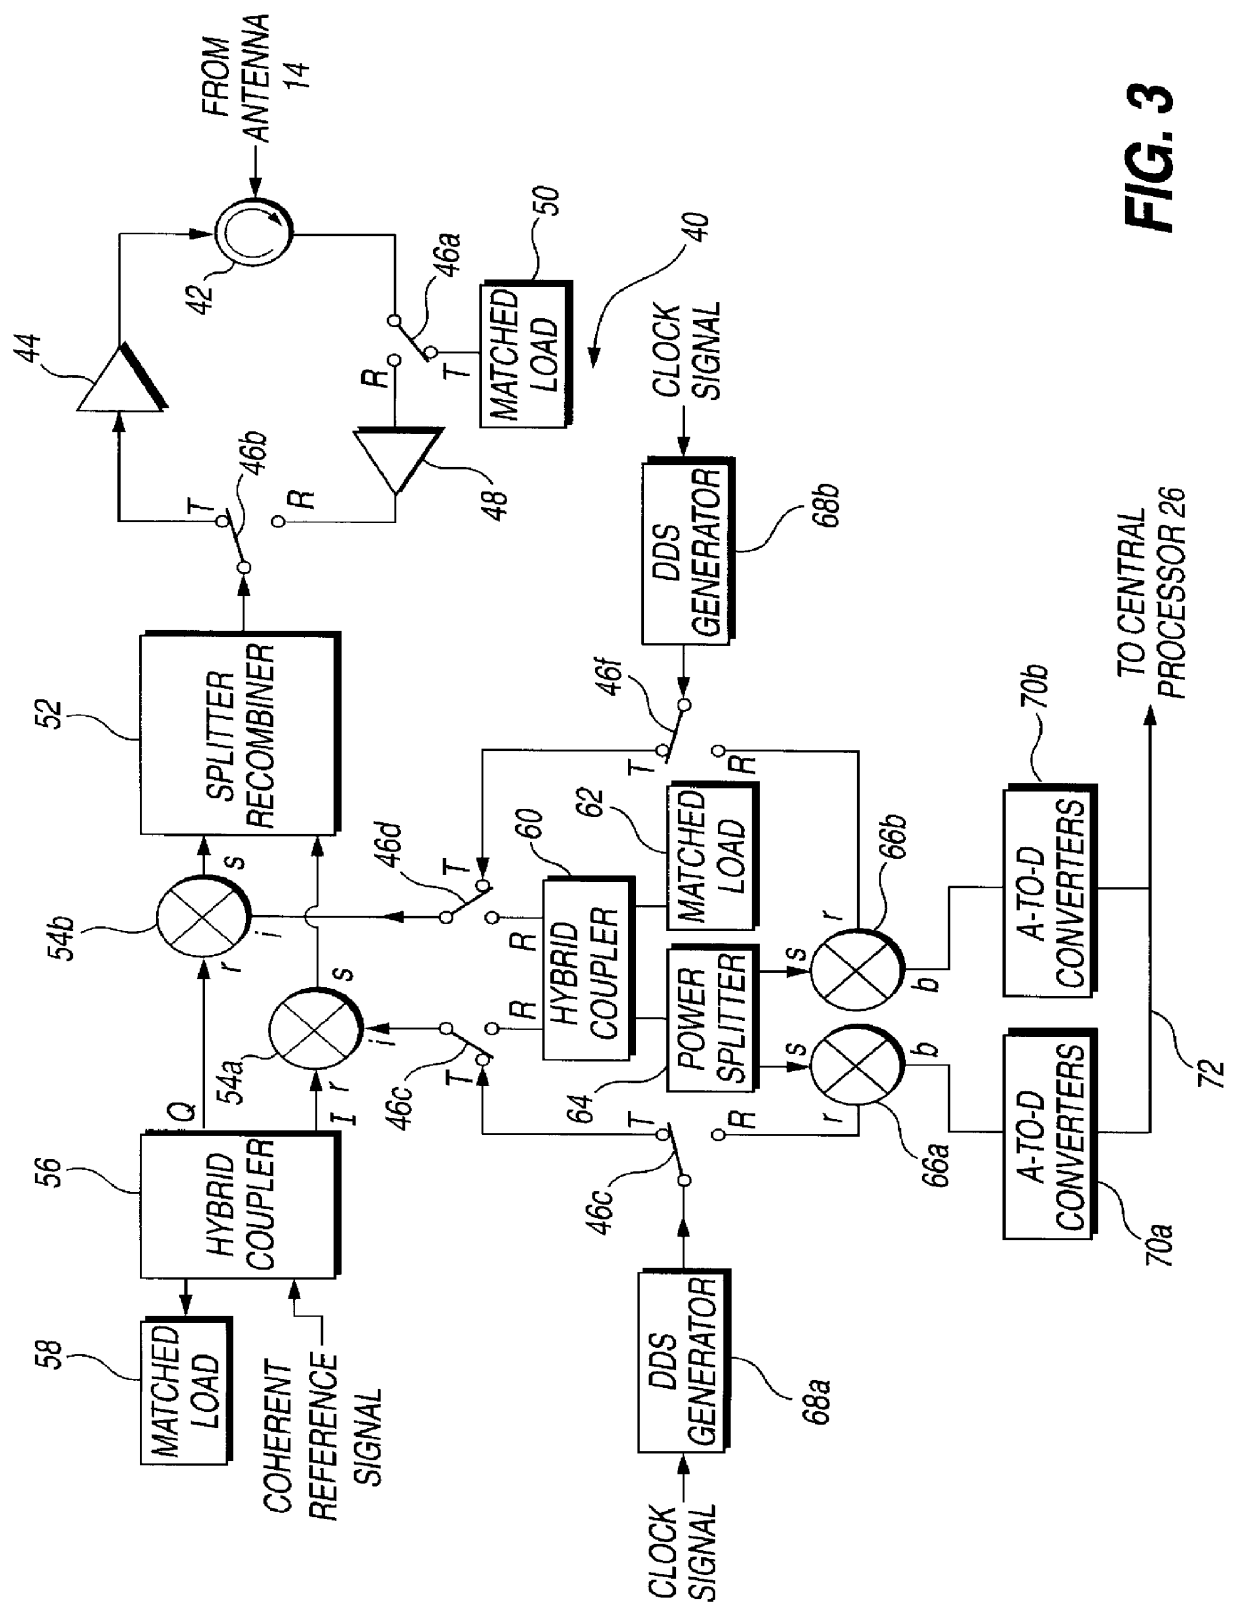 Circuit module for a phased array radar